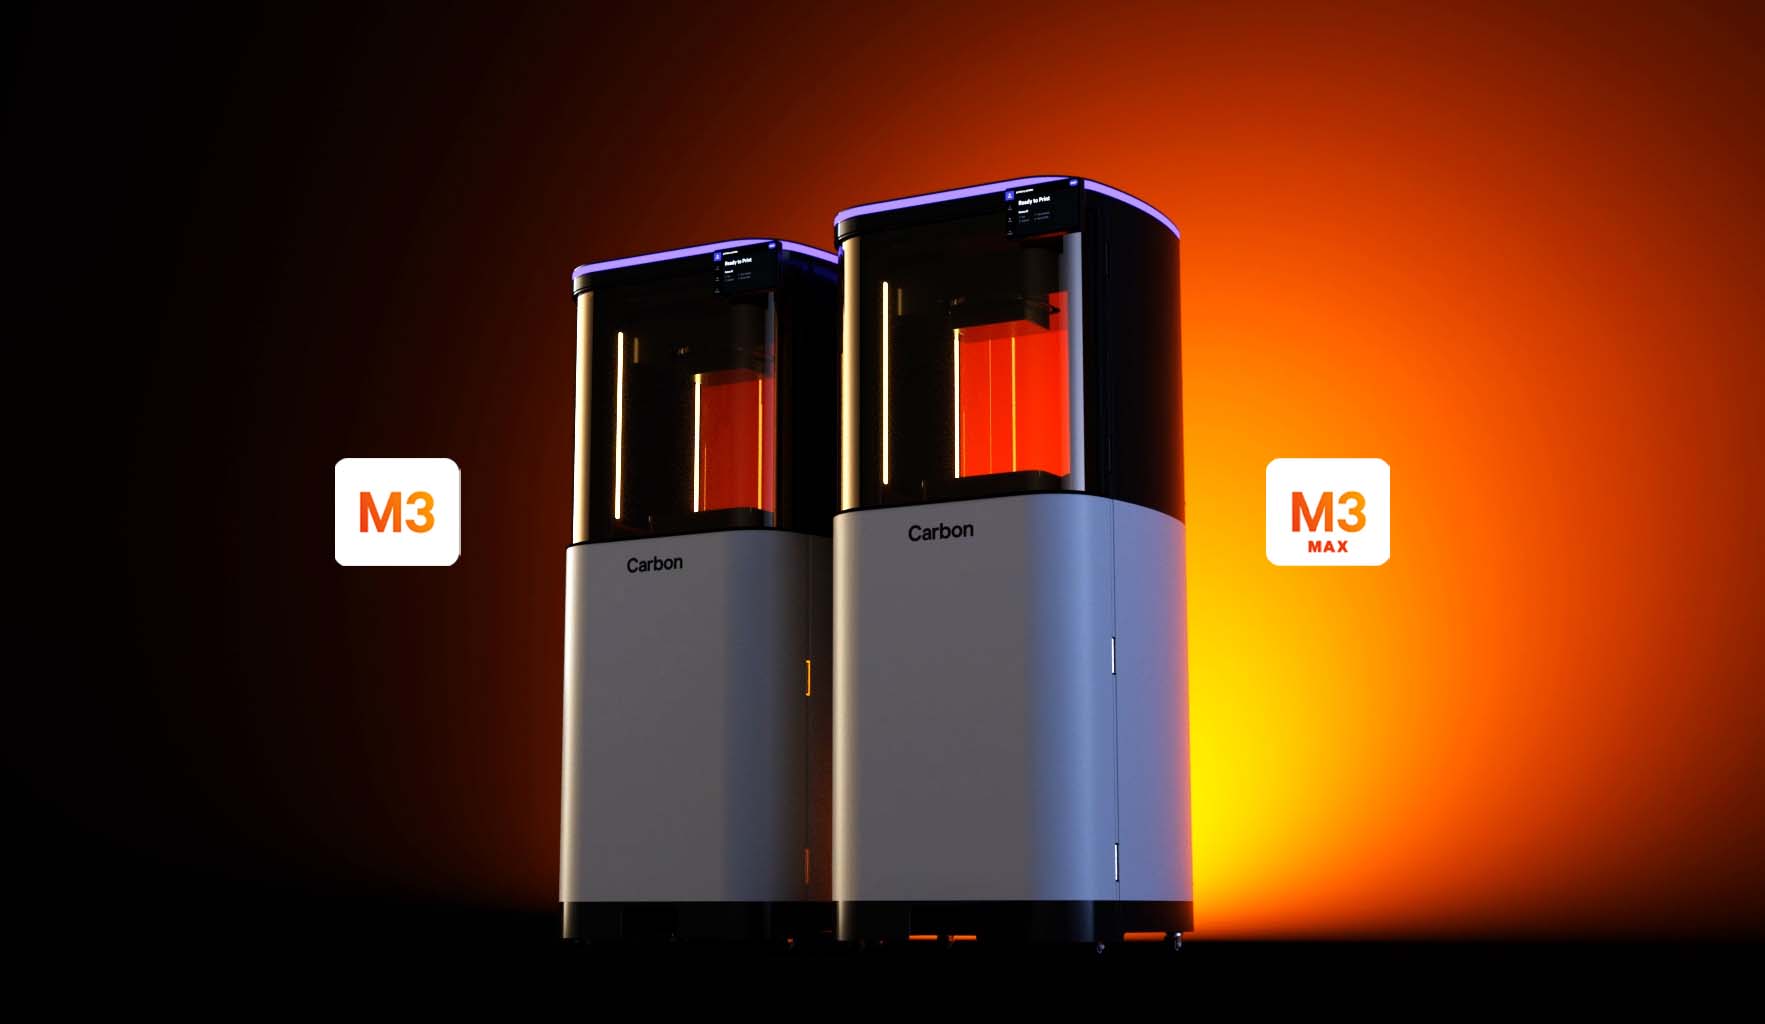 Carbon new M3 and M3 Max 3D printers - specifications and pricing - 3D Industry